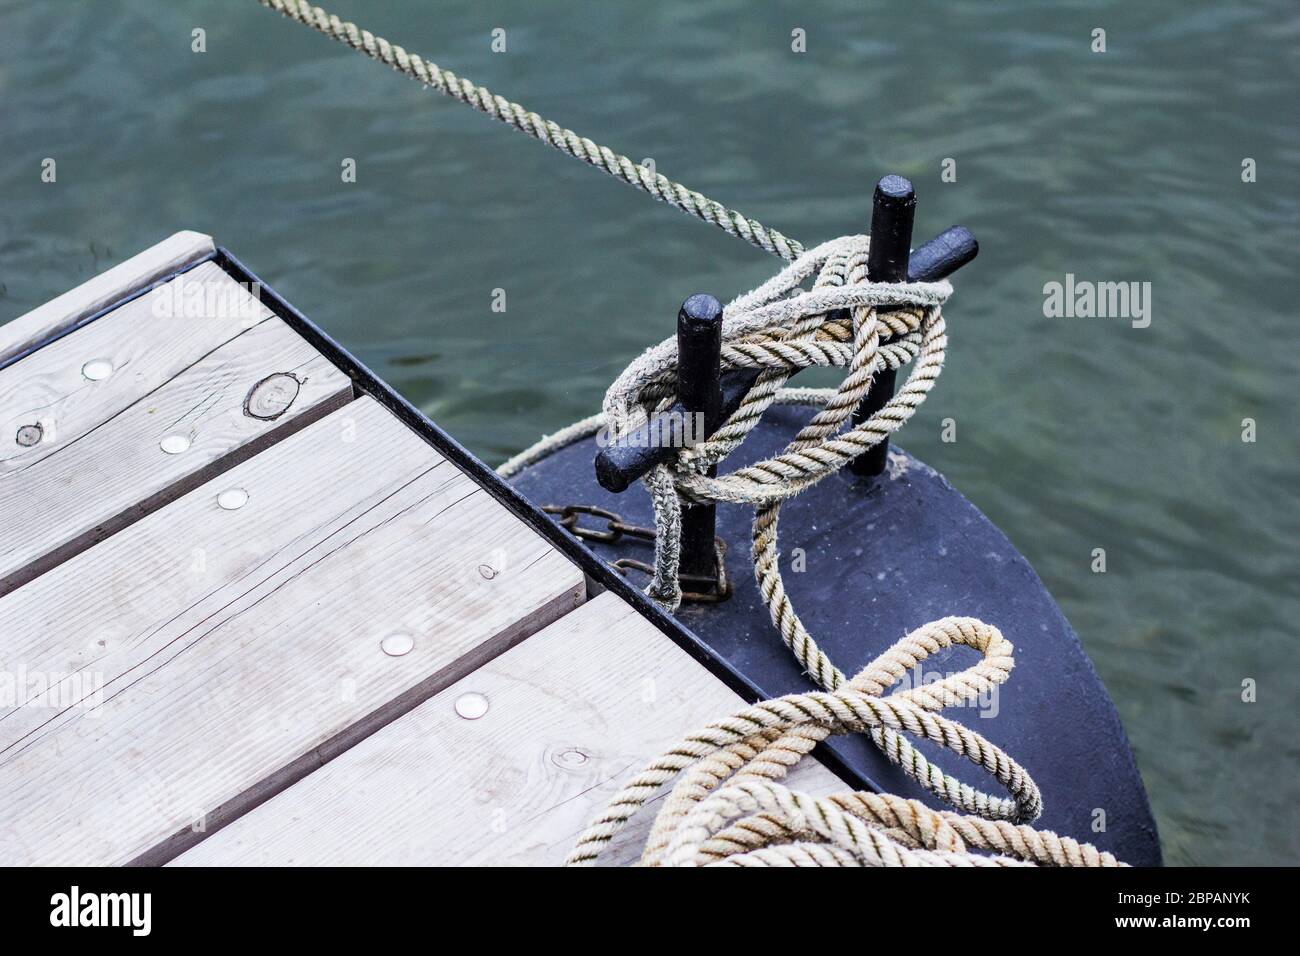 Ship line moored to the mooring post on a modern wooden jetty hobby safety pile group risk of tripping pier expert knowledge Stock Photo